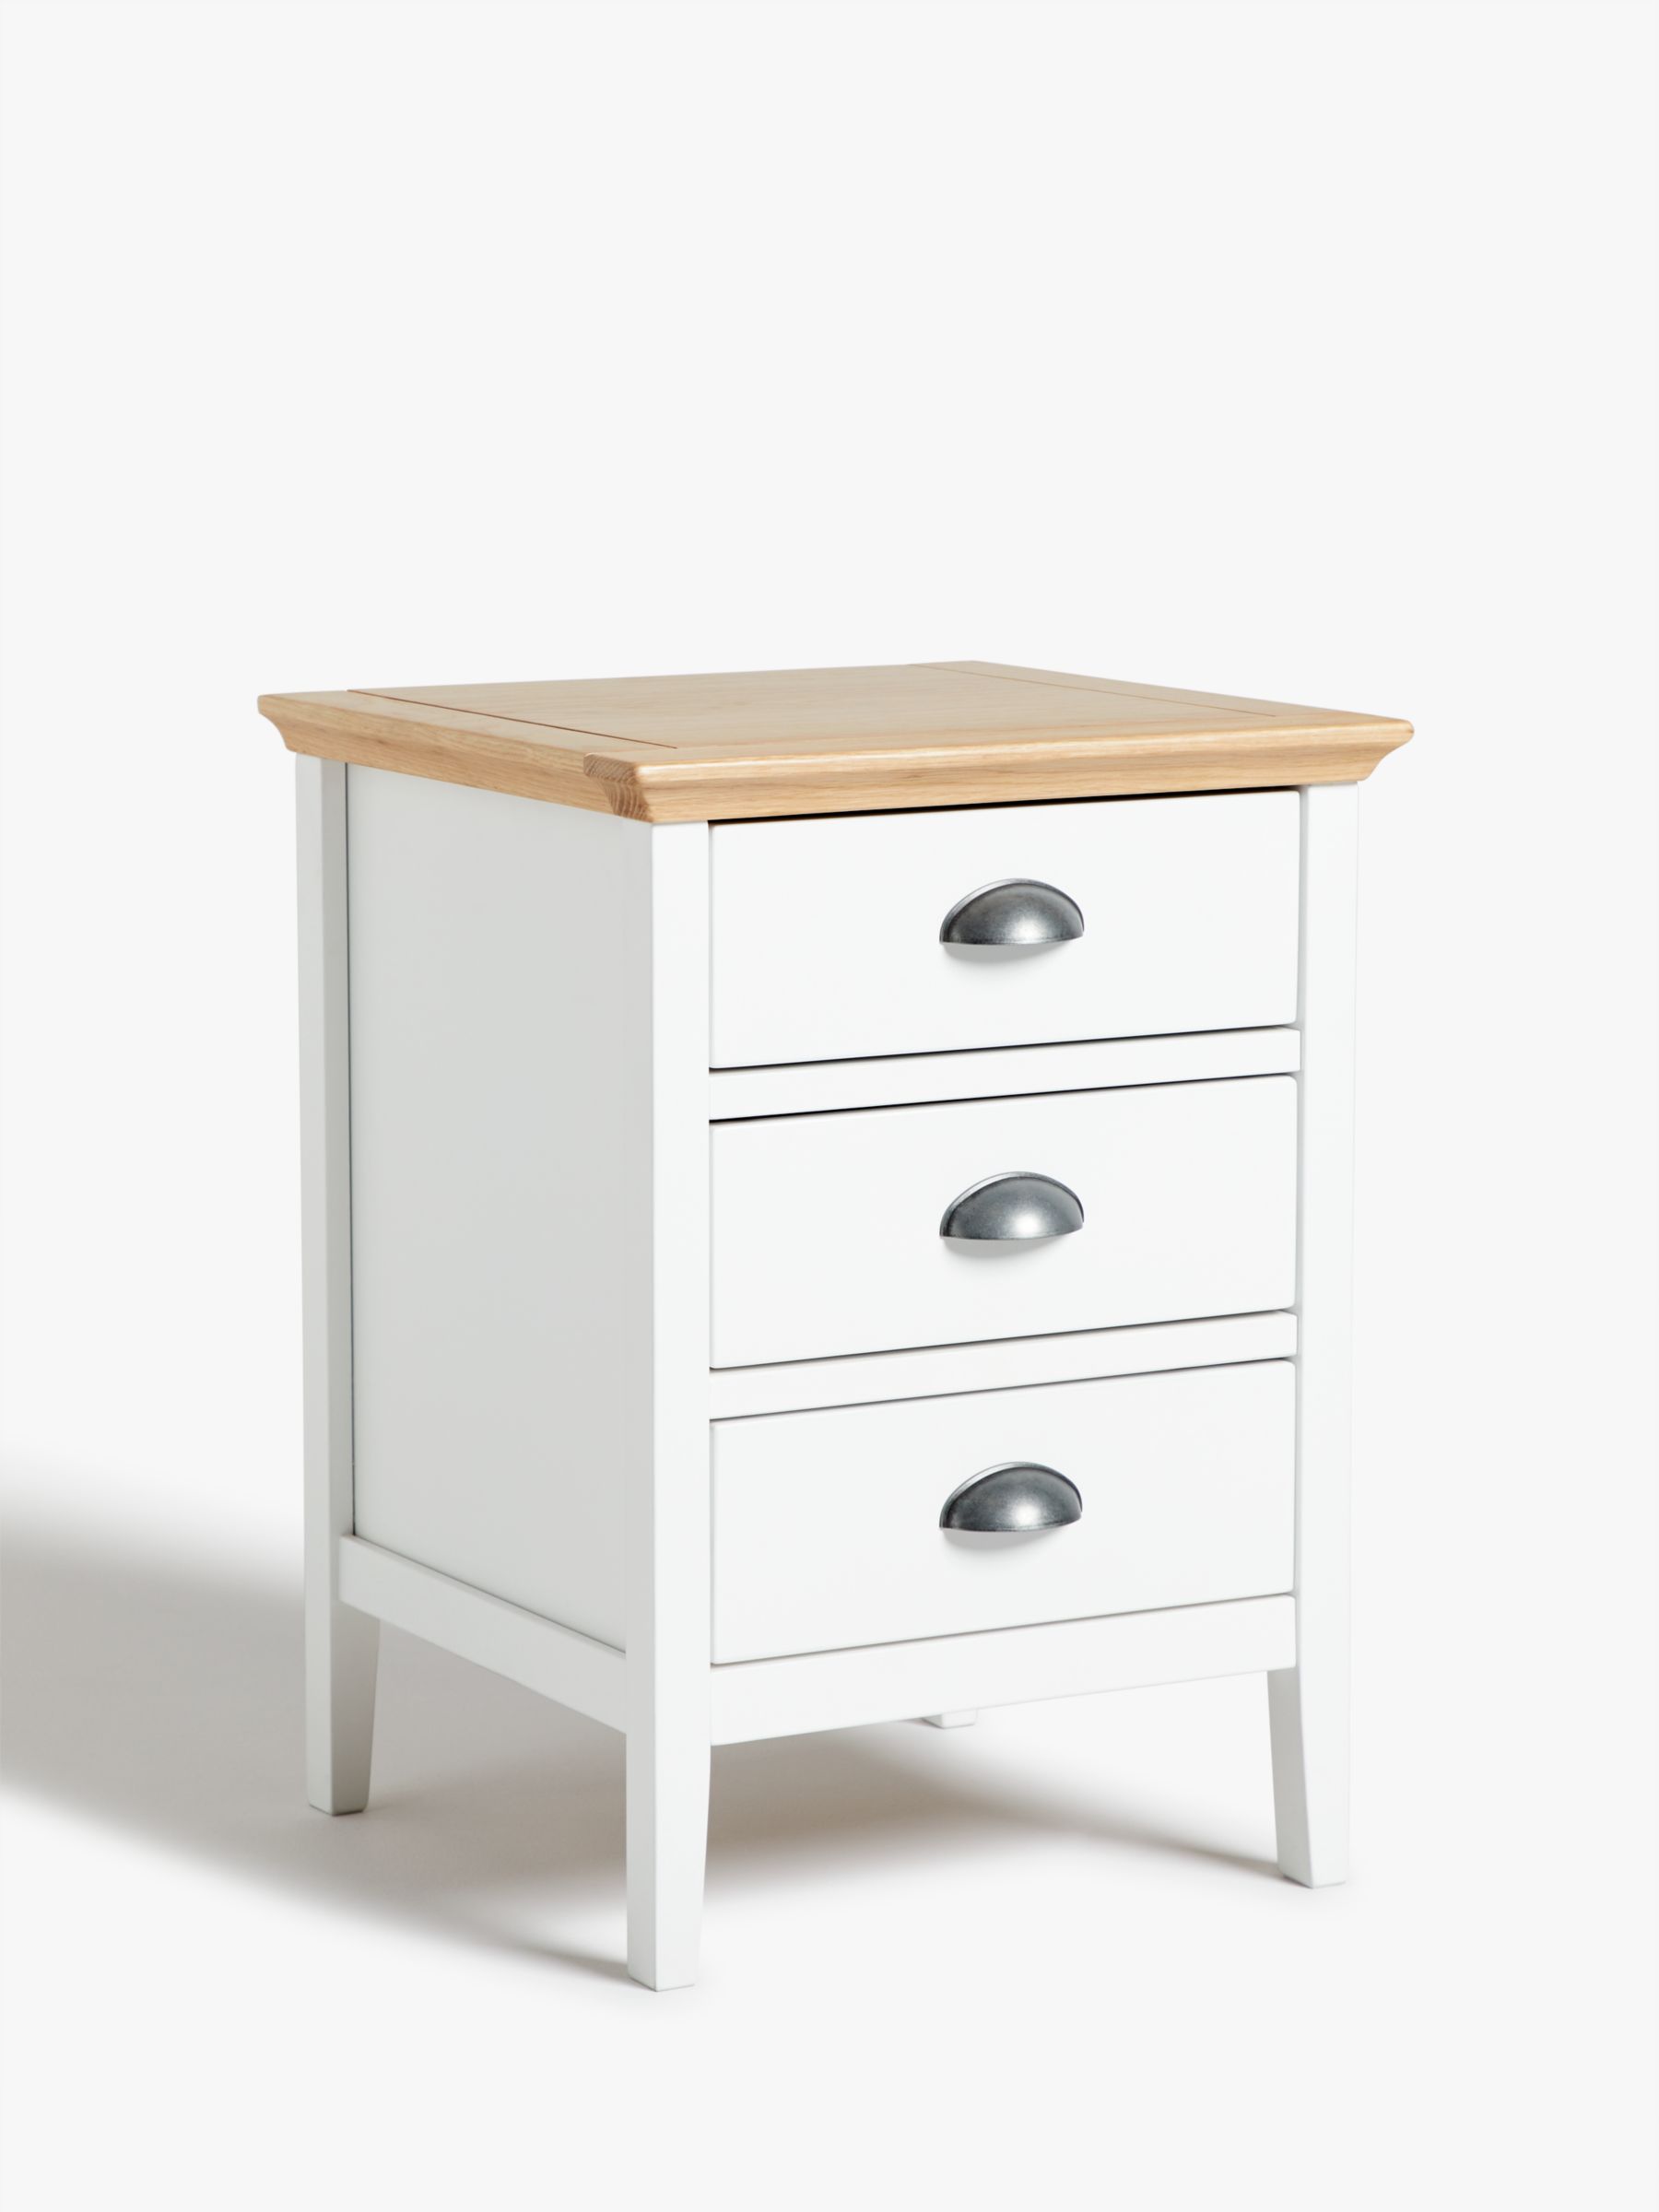 John Lewis Partners Albany 3 Drawer Bedside Table At John Lewis